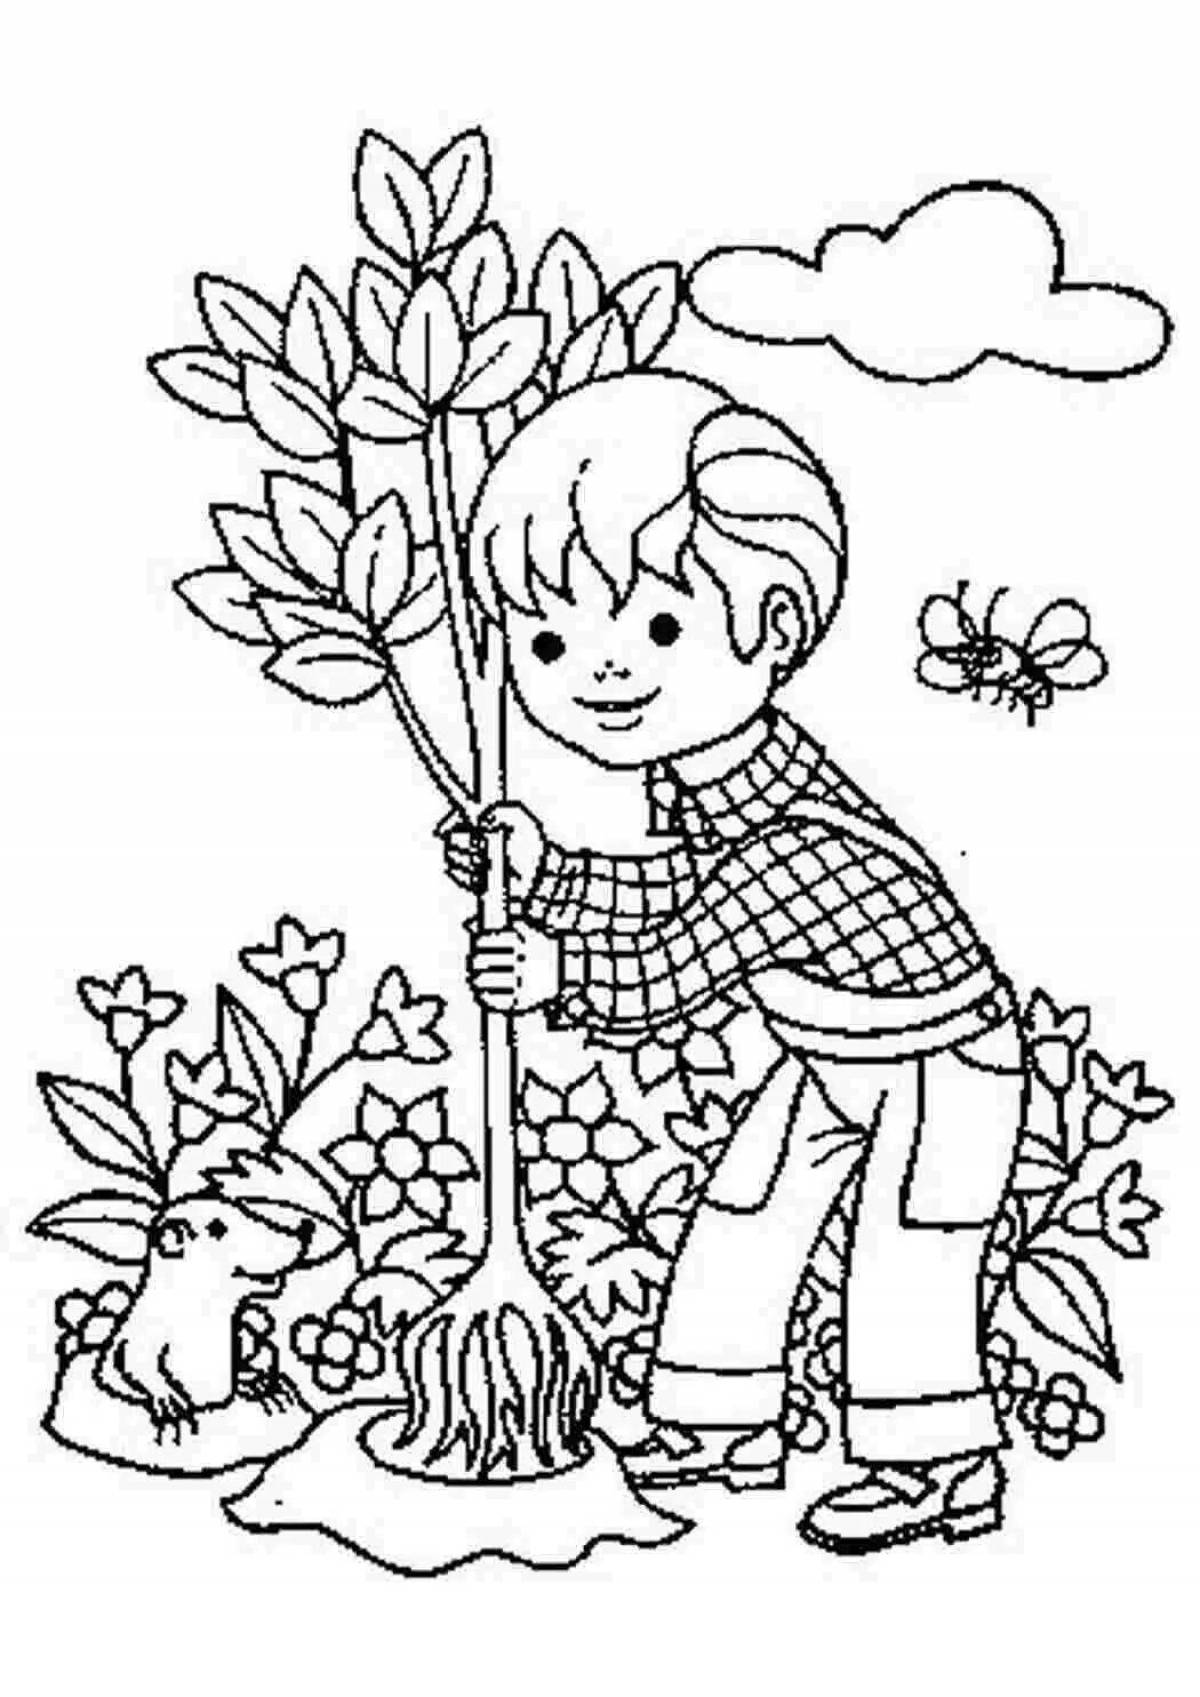 Playful save nature coloring page